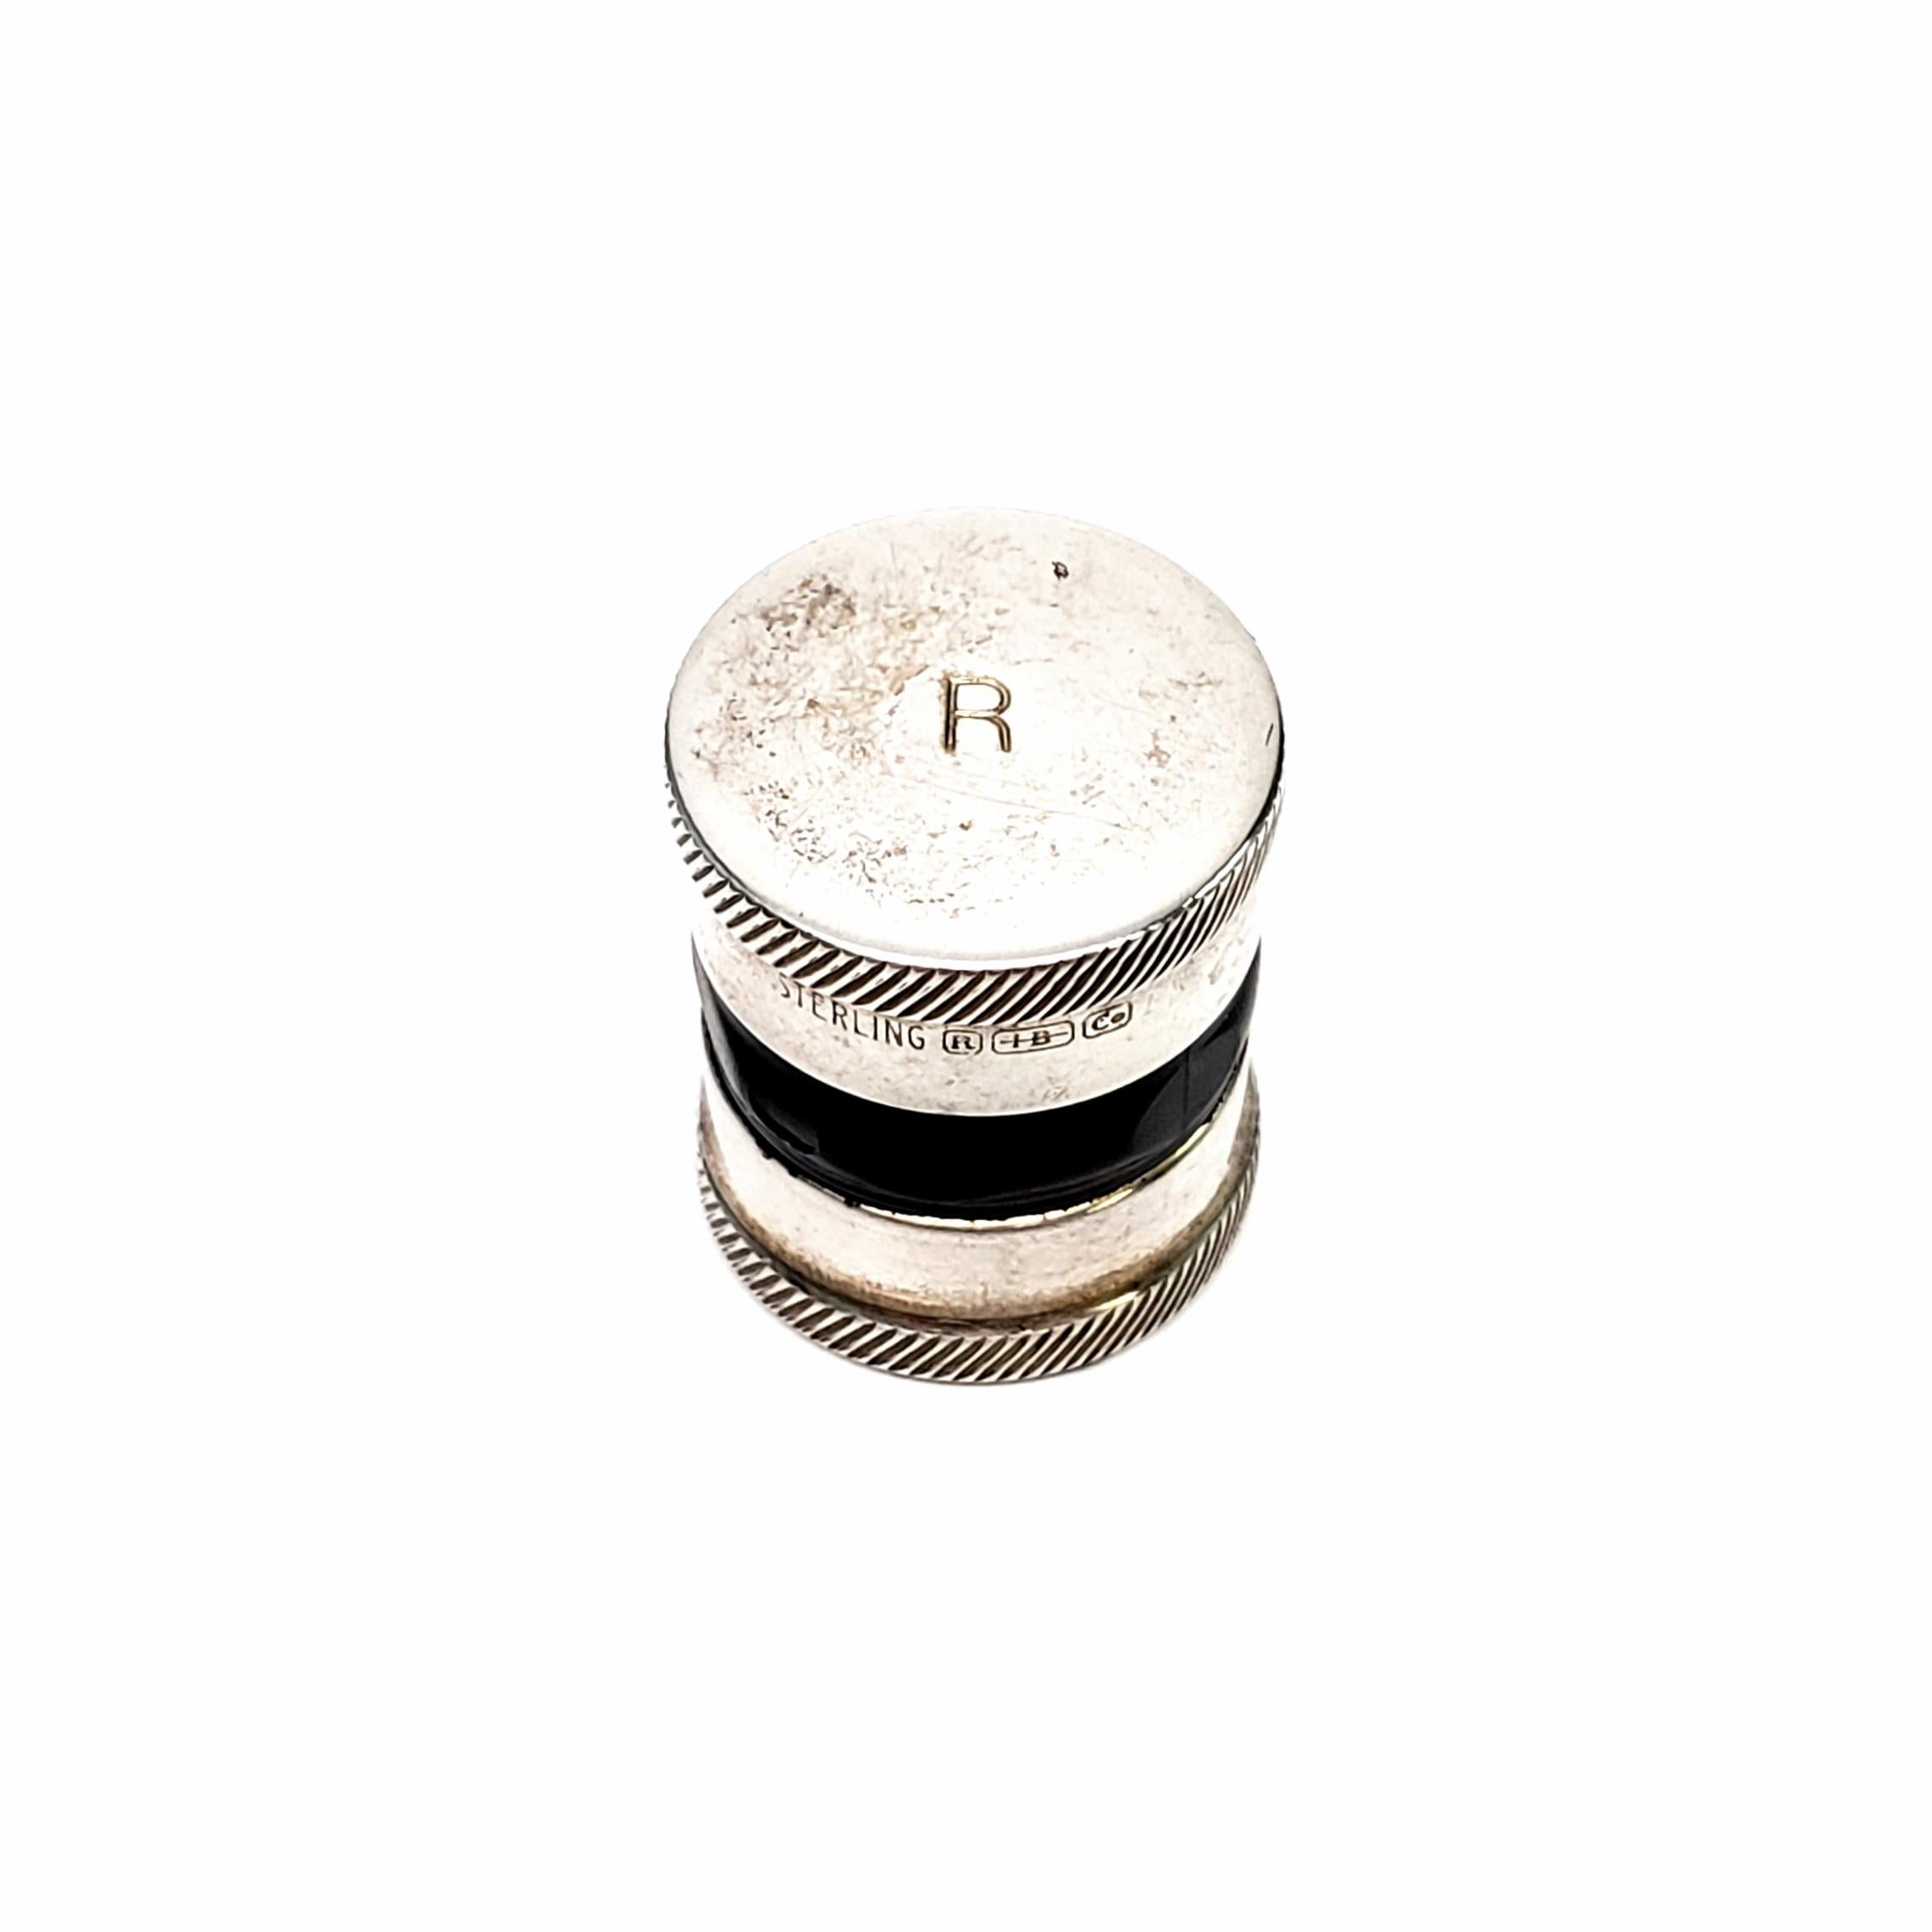 Antique sterling silver contact lens case by R. Blackington Co.

This antique contact lens case features an R for the right lens, and a monogram on the other side, and a black grip in the middle to help unscrew the lids.

Measures 1